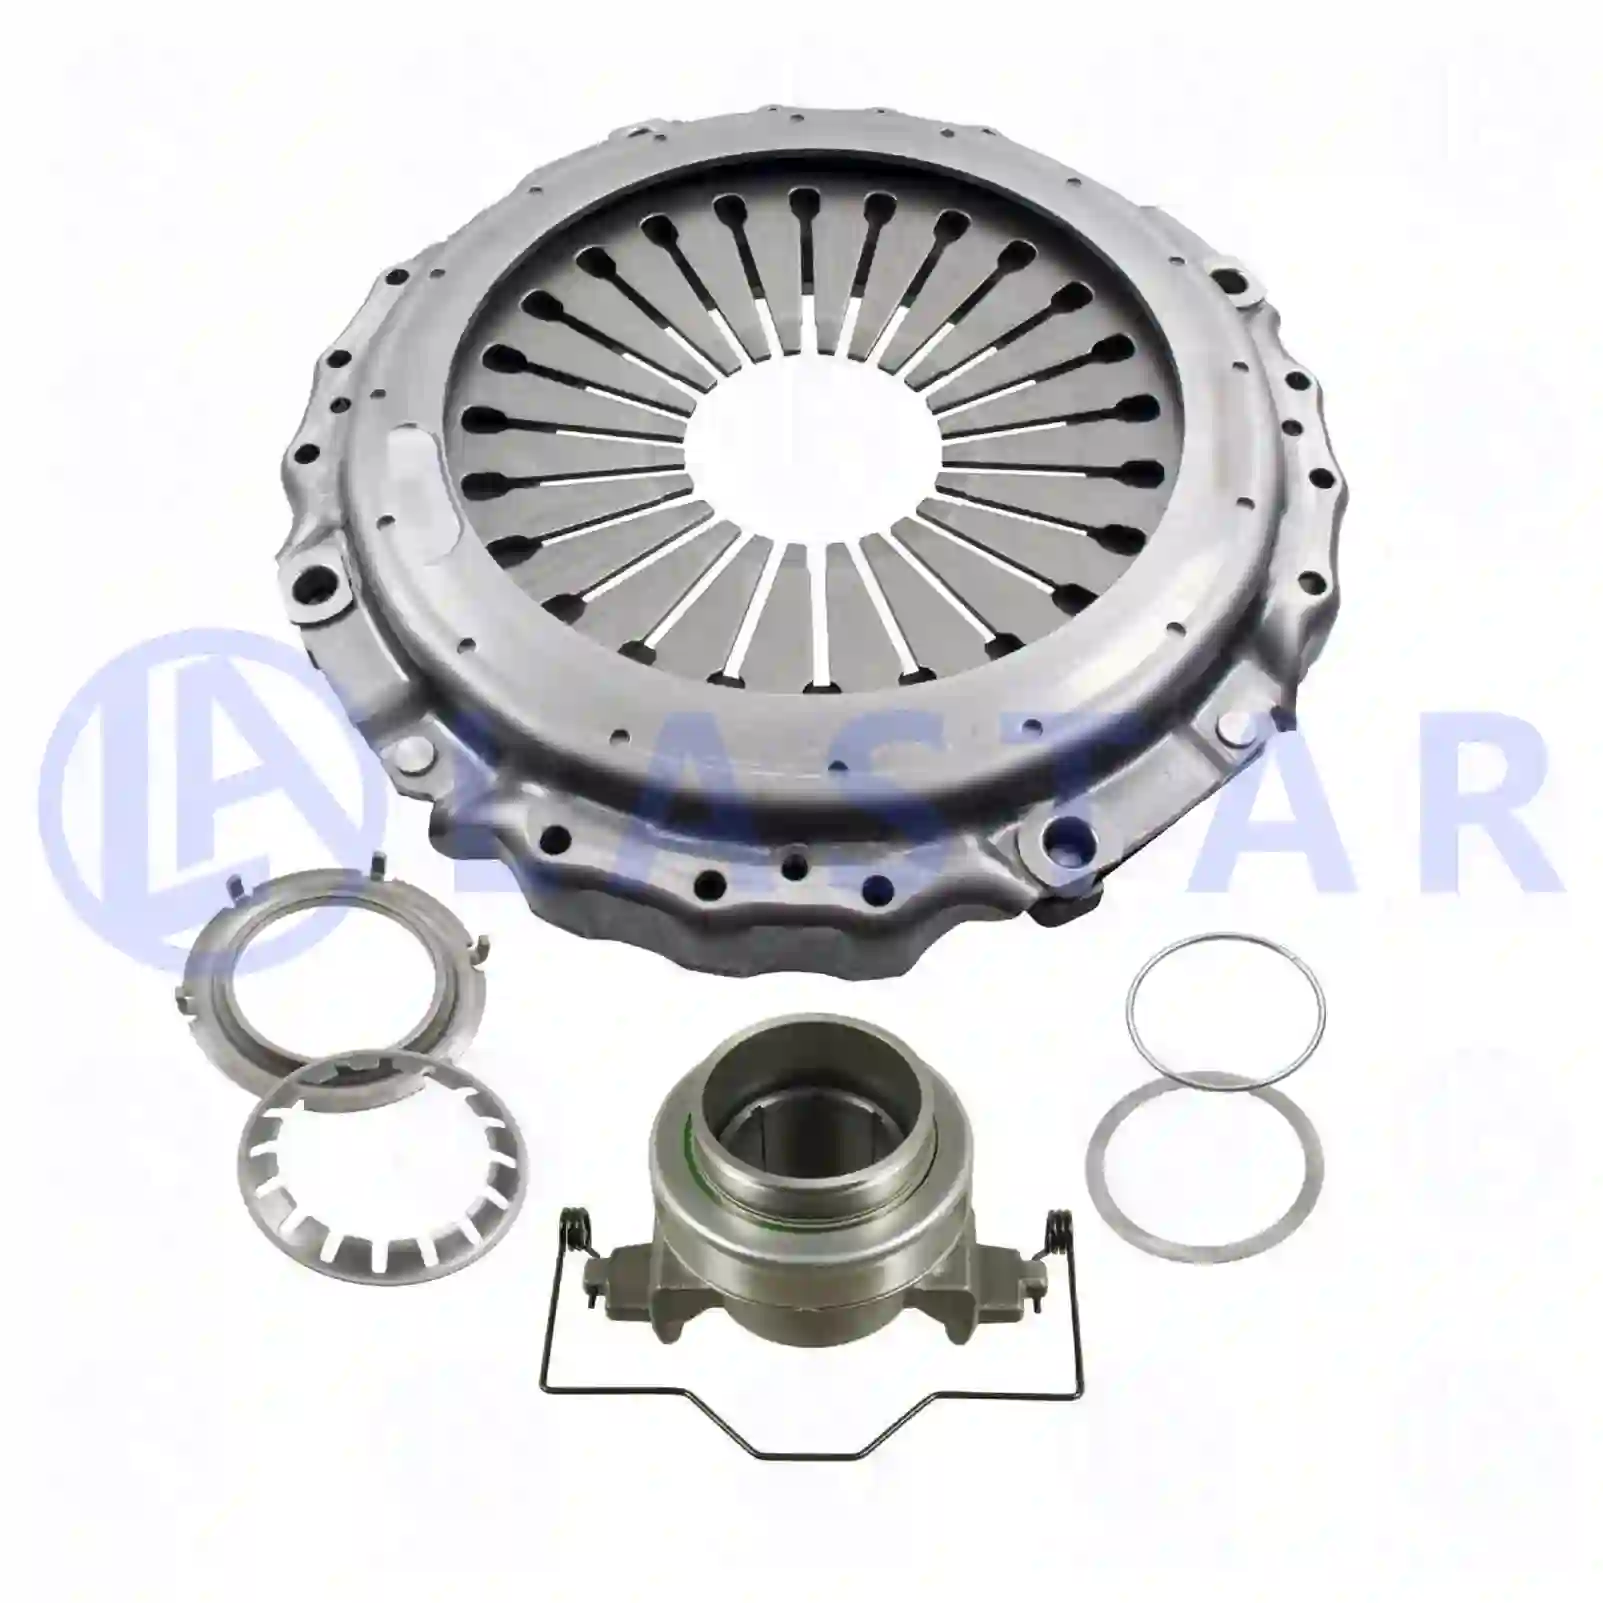 Clutch cover, with release bearing, 77722265, 1521713, 20569130, 3192202, 8113514, 8116514, 8119514, 85000525 ||  77722265 Lastar Spare Part | Truck Spare Parts, Auotomotive Spare Parts Clutch cover, with release bearing, 77722265, 1521713, 20569130, 3192202, 8113514, 8116514, 8119514, 85000525 ||  77722265 Lastar Spare Part | Truck Spare Parts, Auotomotive Spare Parts